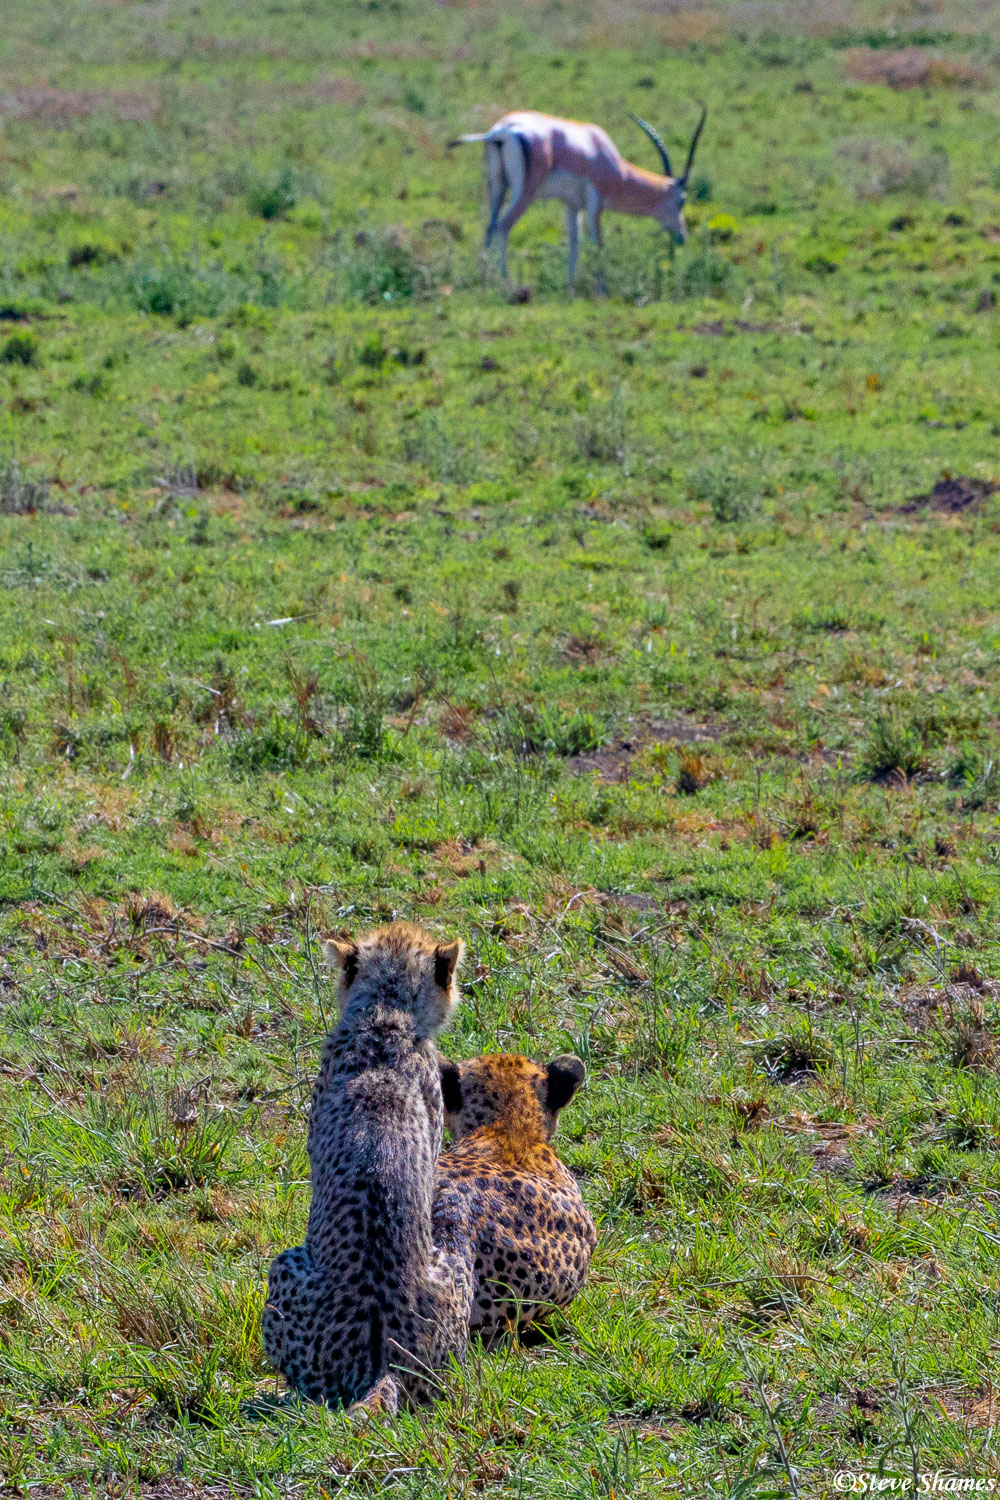 The cheetahs move up closer and the grant's gazelle does not notice.